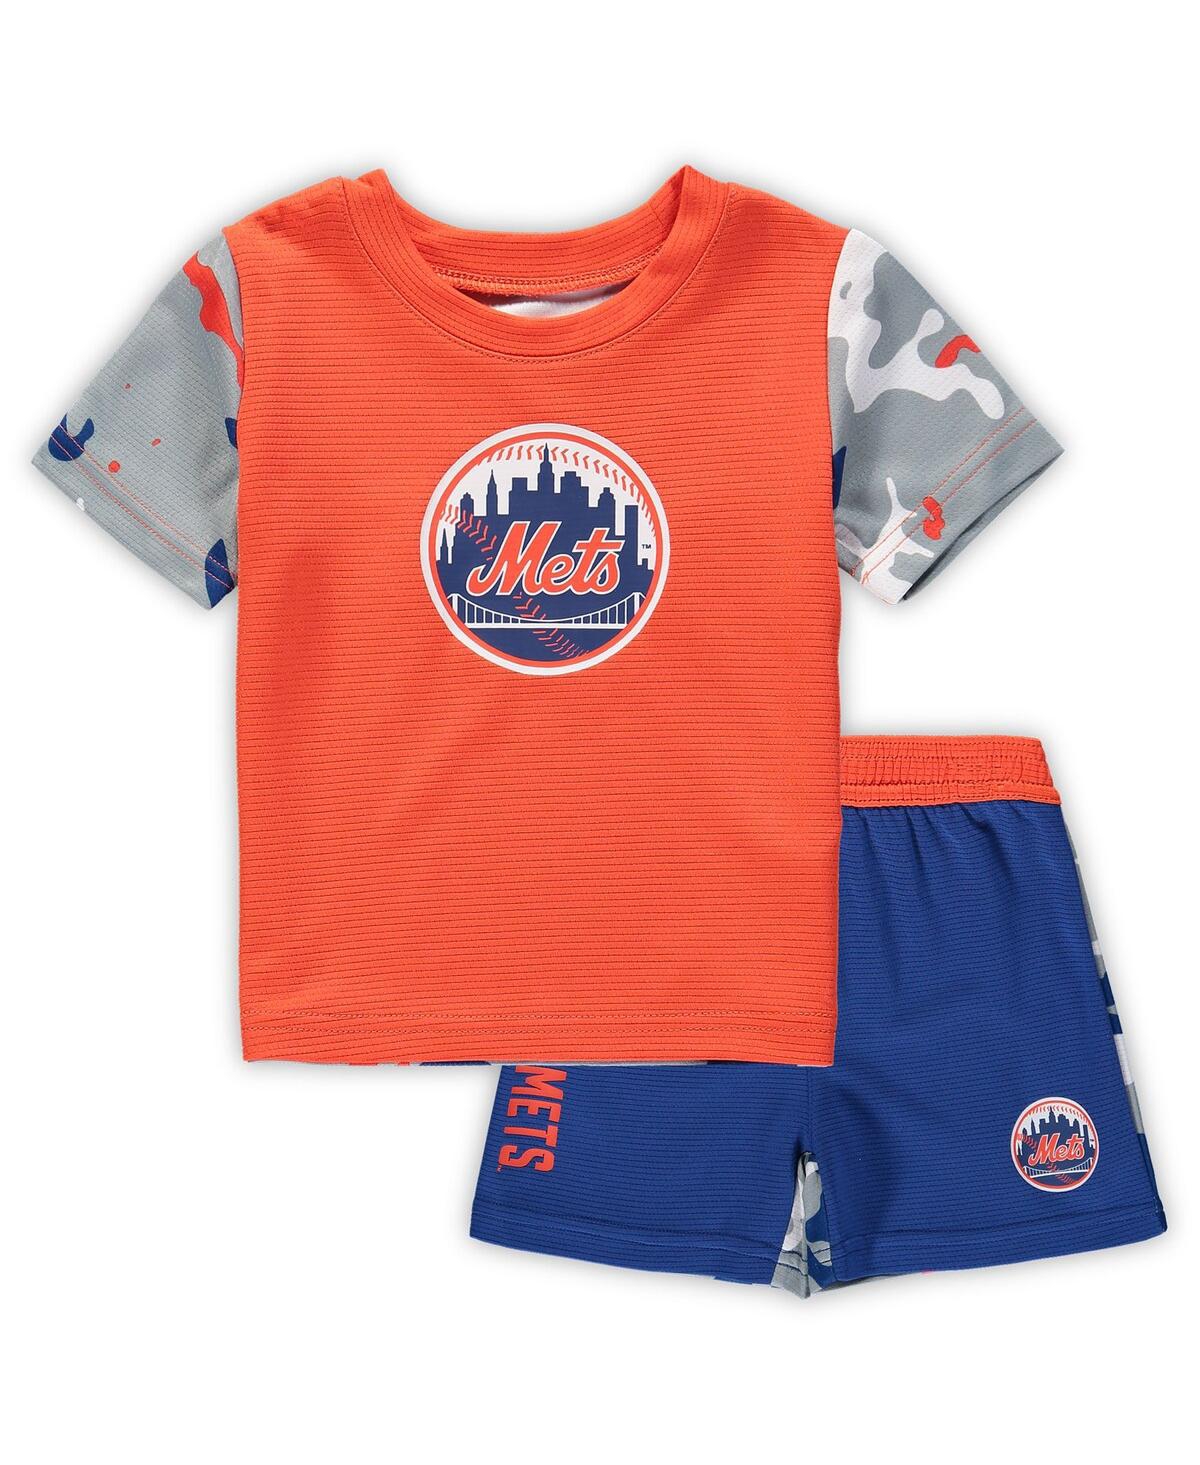 Outerstuff Babies' Newborn And Infant Boys And Girls Orange, Royal New York Mets Pinch Hitter T-shirt And Shorts Set In Orange,royal